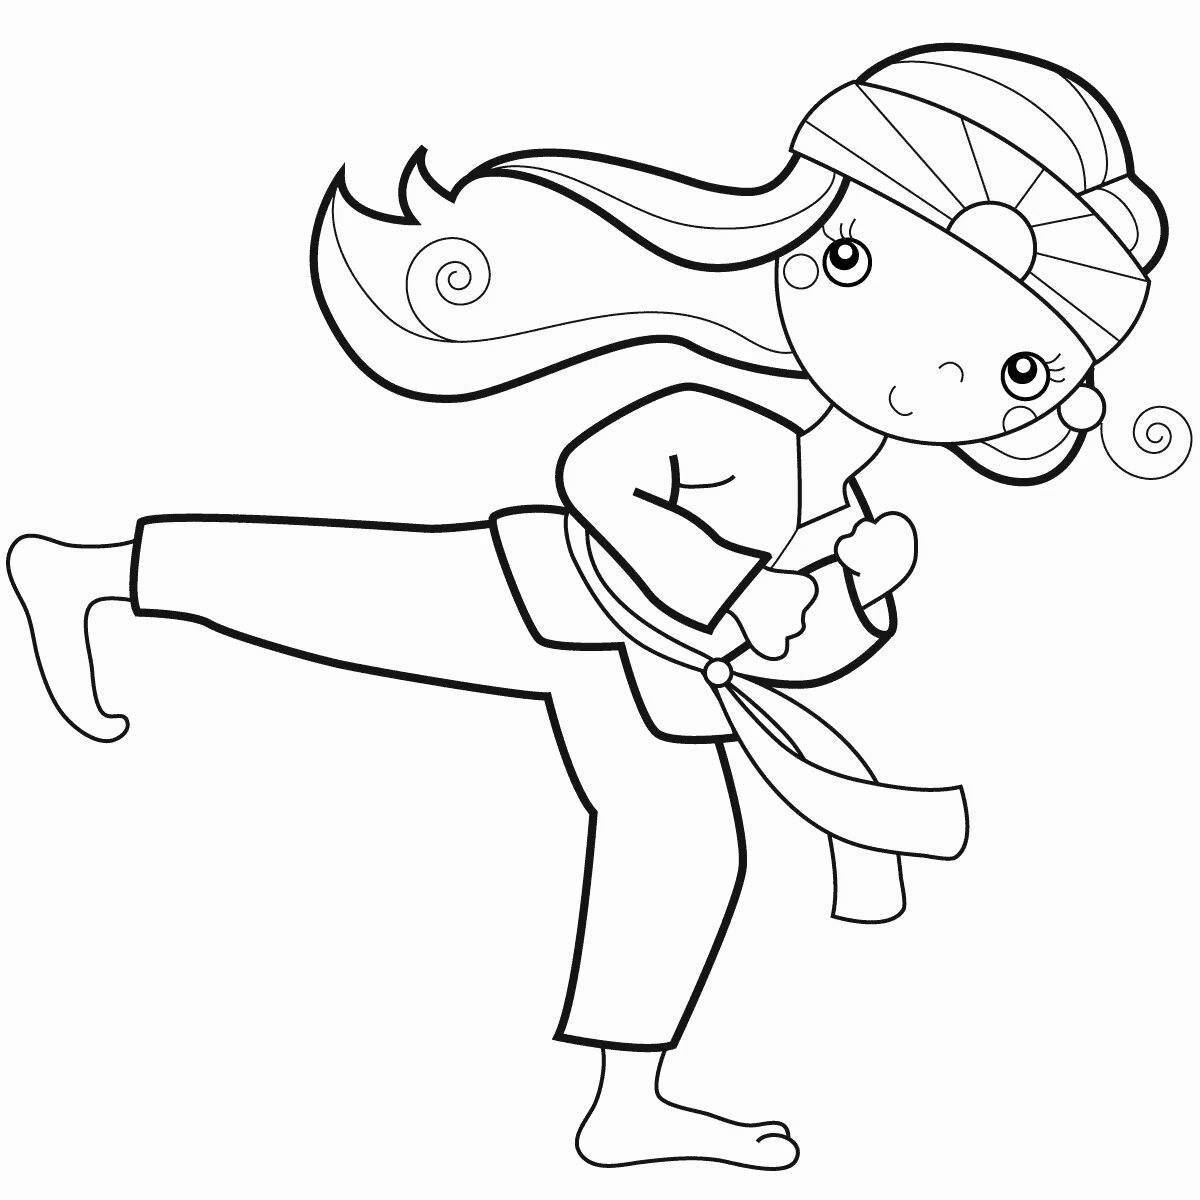 Cute trainer coloring page